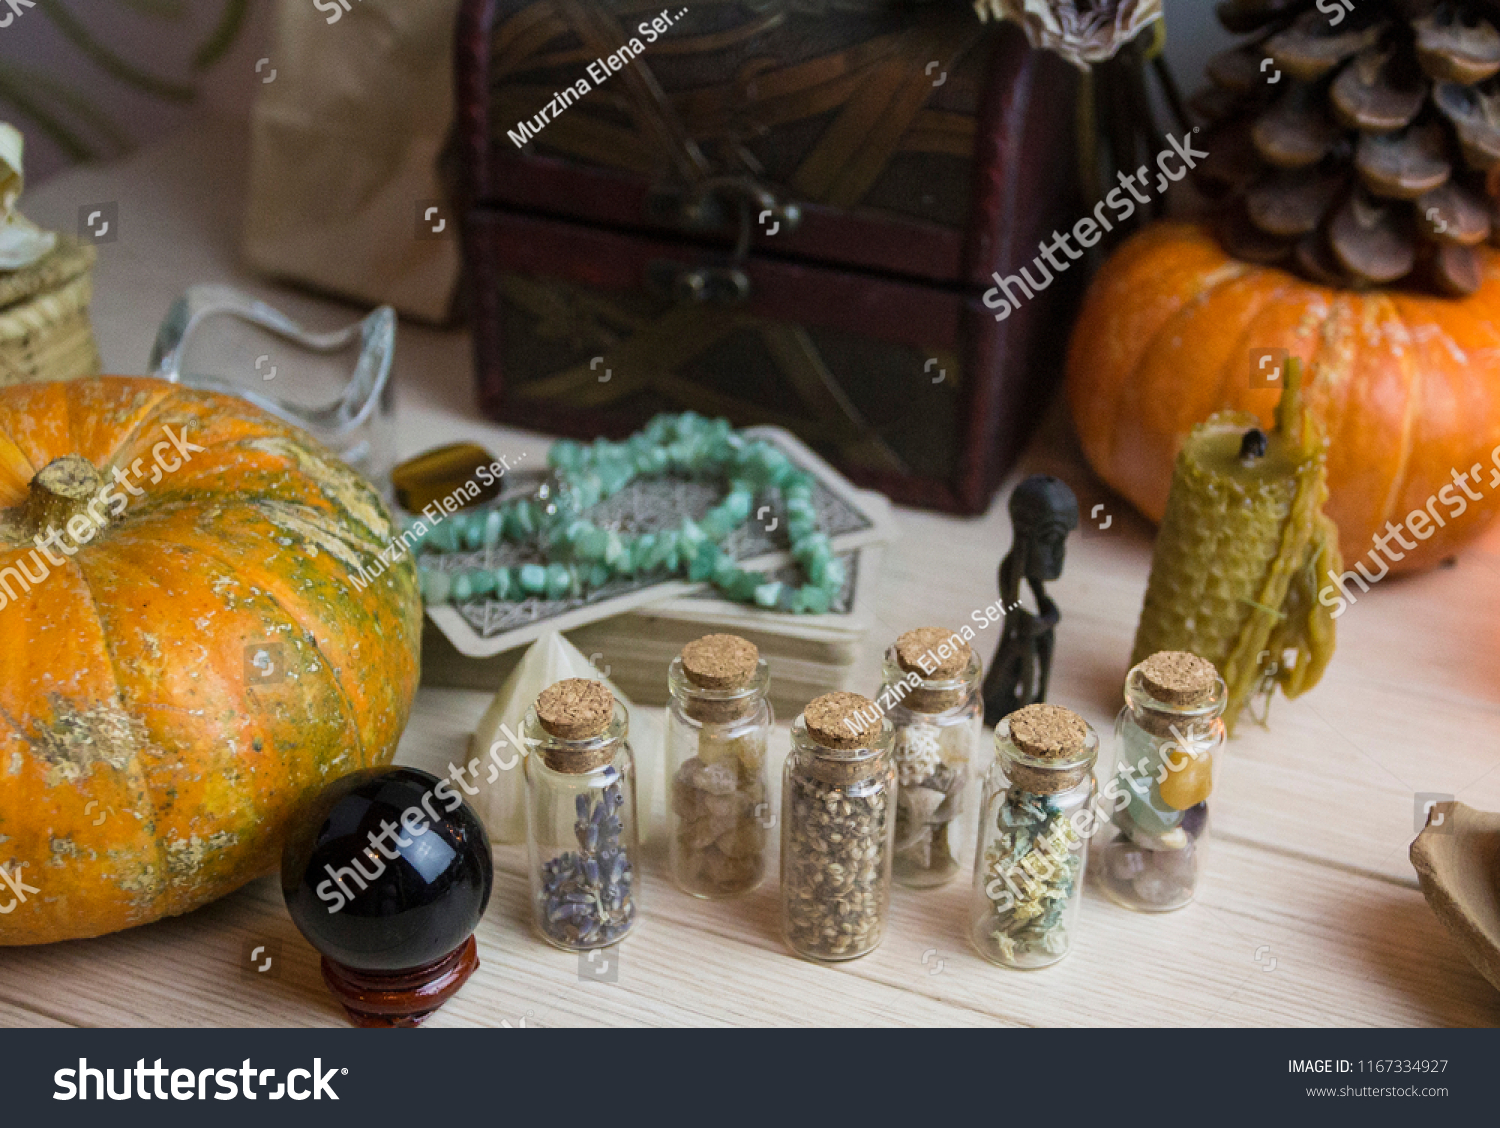 A test tube with seeds and stones, pumpkin and crystals, witchcraft, Wicca #1167334927